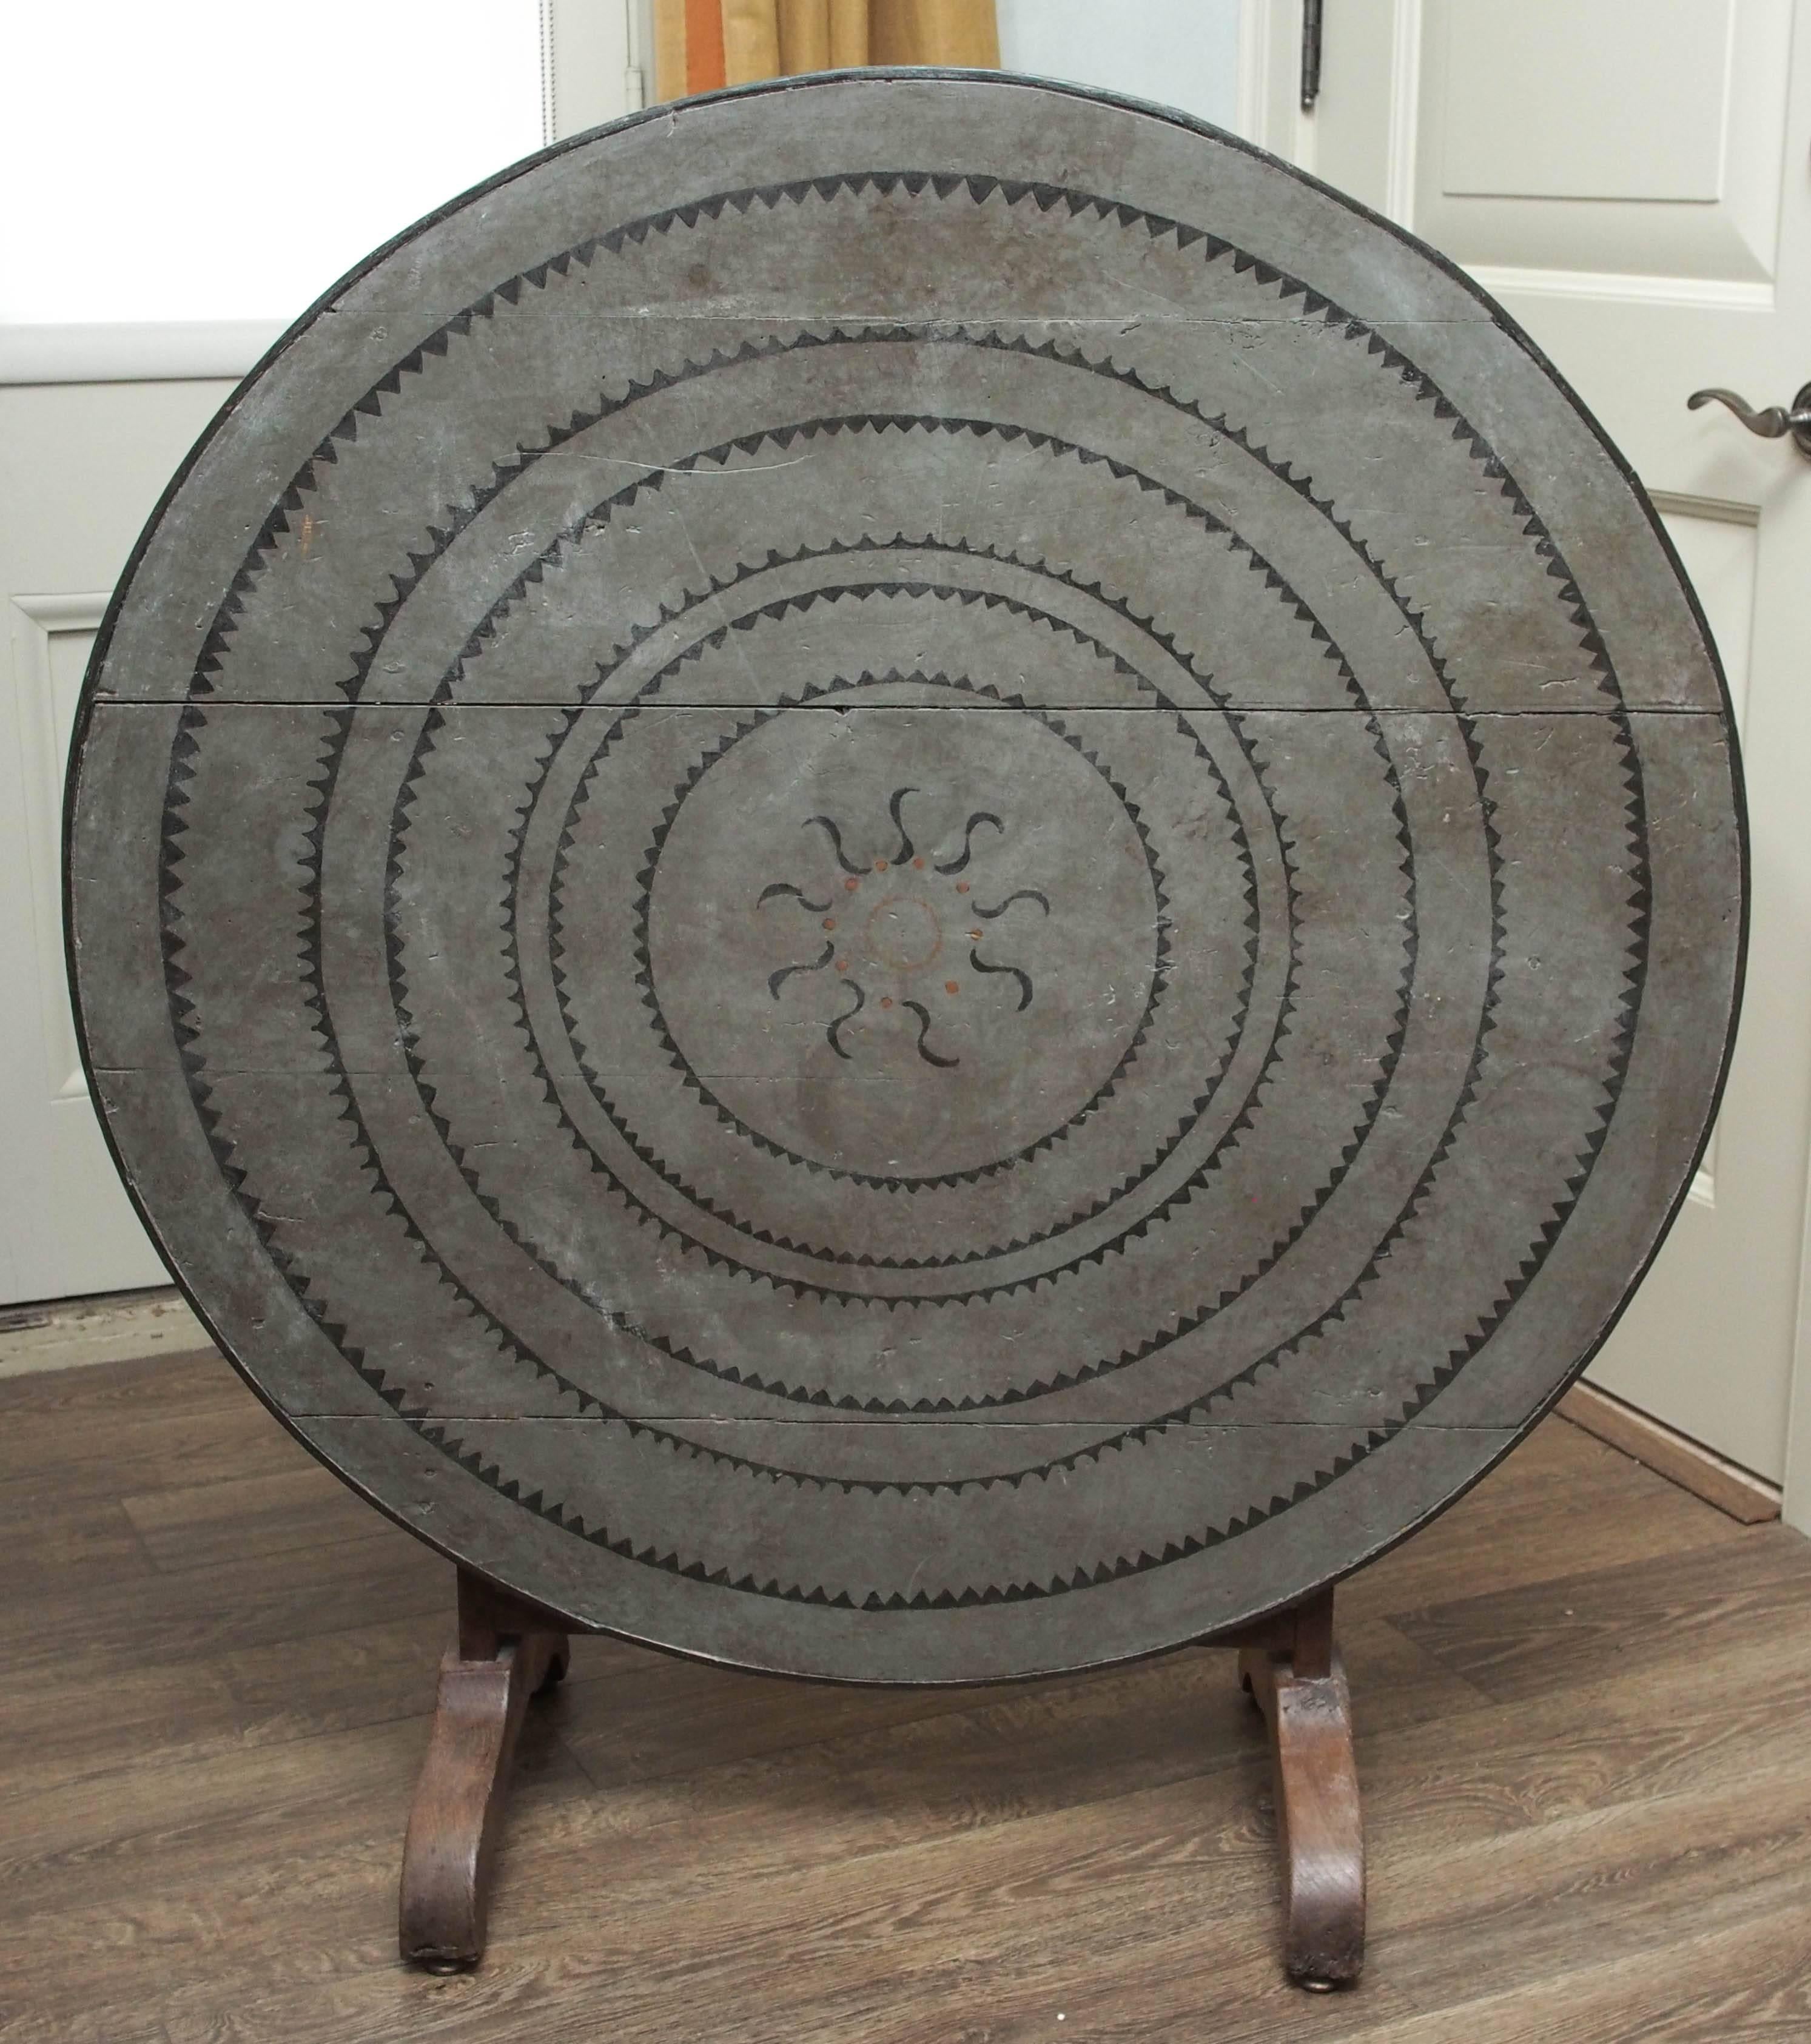 A beautiful turn of the century French oak wine table with a painted canvas cover. The cover features a graphic of a sun centered inside radiating rings of light. The occasional table also folds for storage.